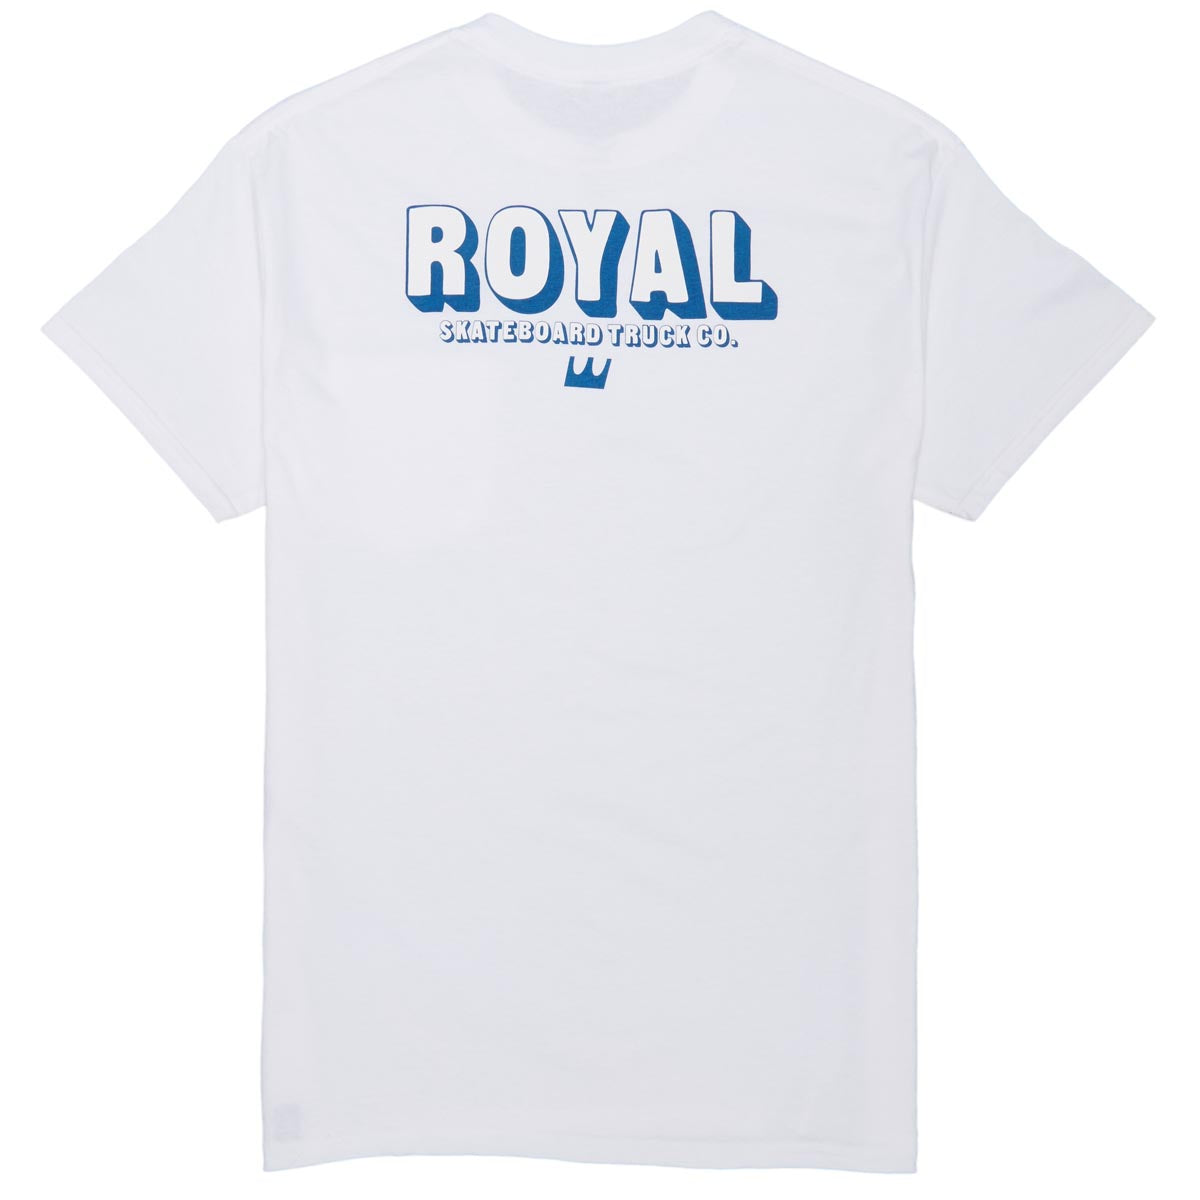 Royal Industrial T-Shirt - White image 1